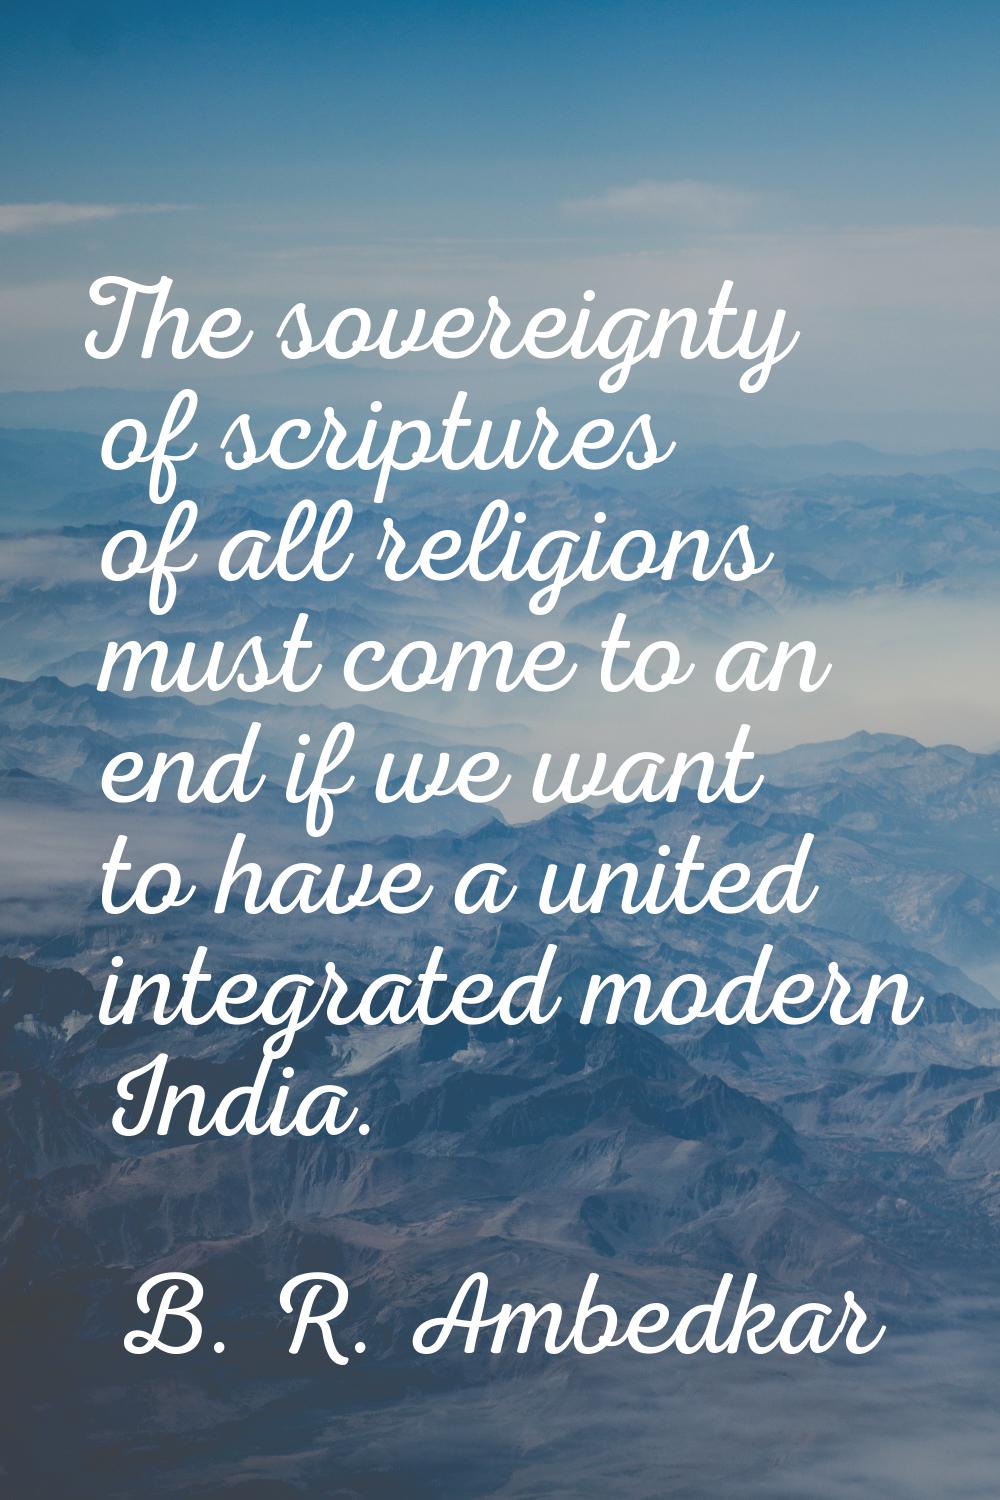 The sovereignty of scriptures of all religions must come to an end if we want to have a united inte